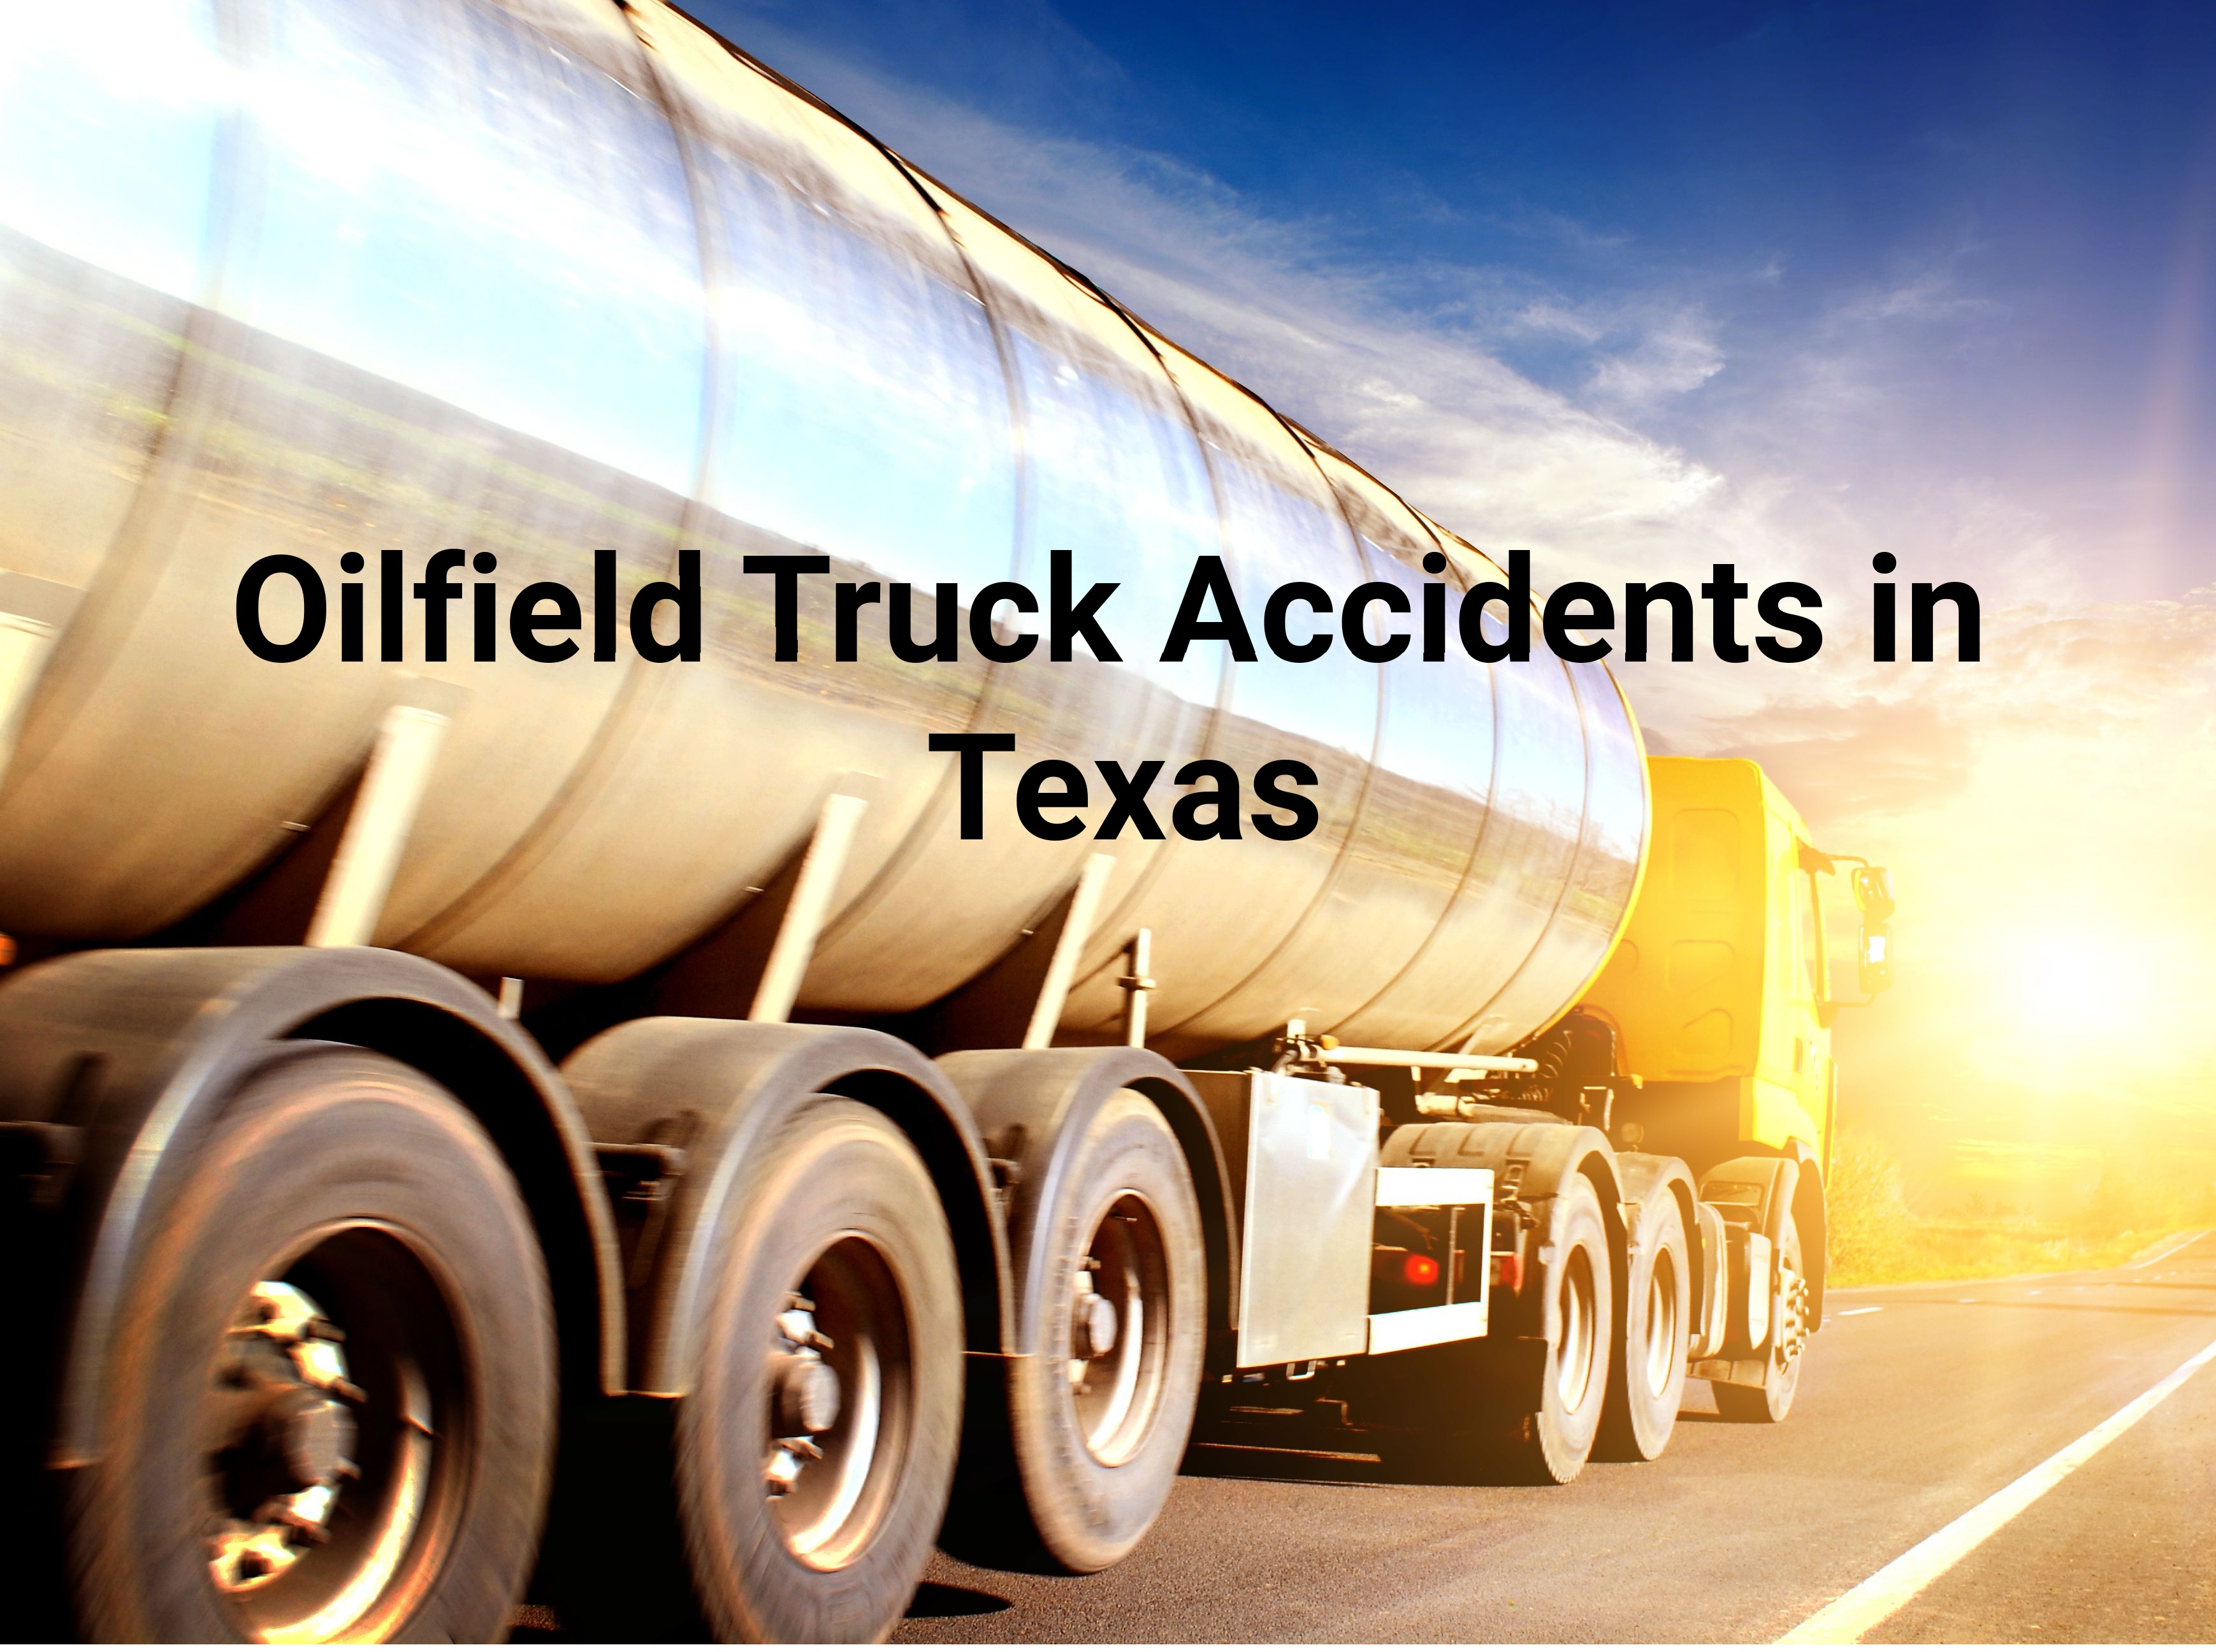 Texas oilfield truck accident lawyer